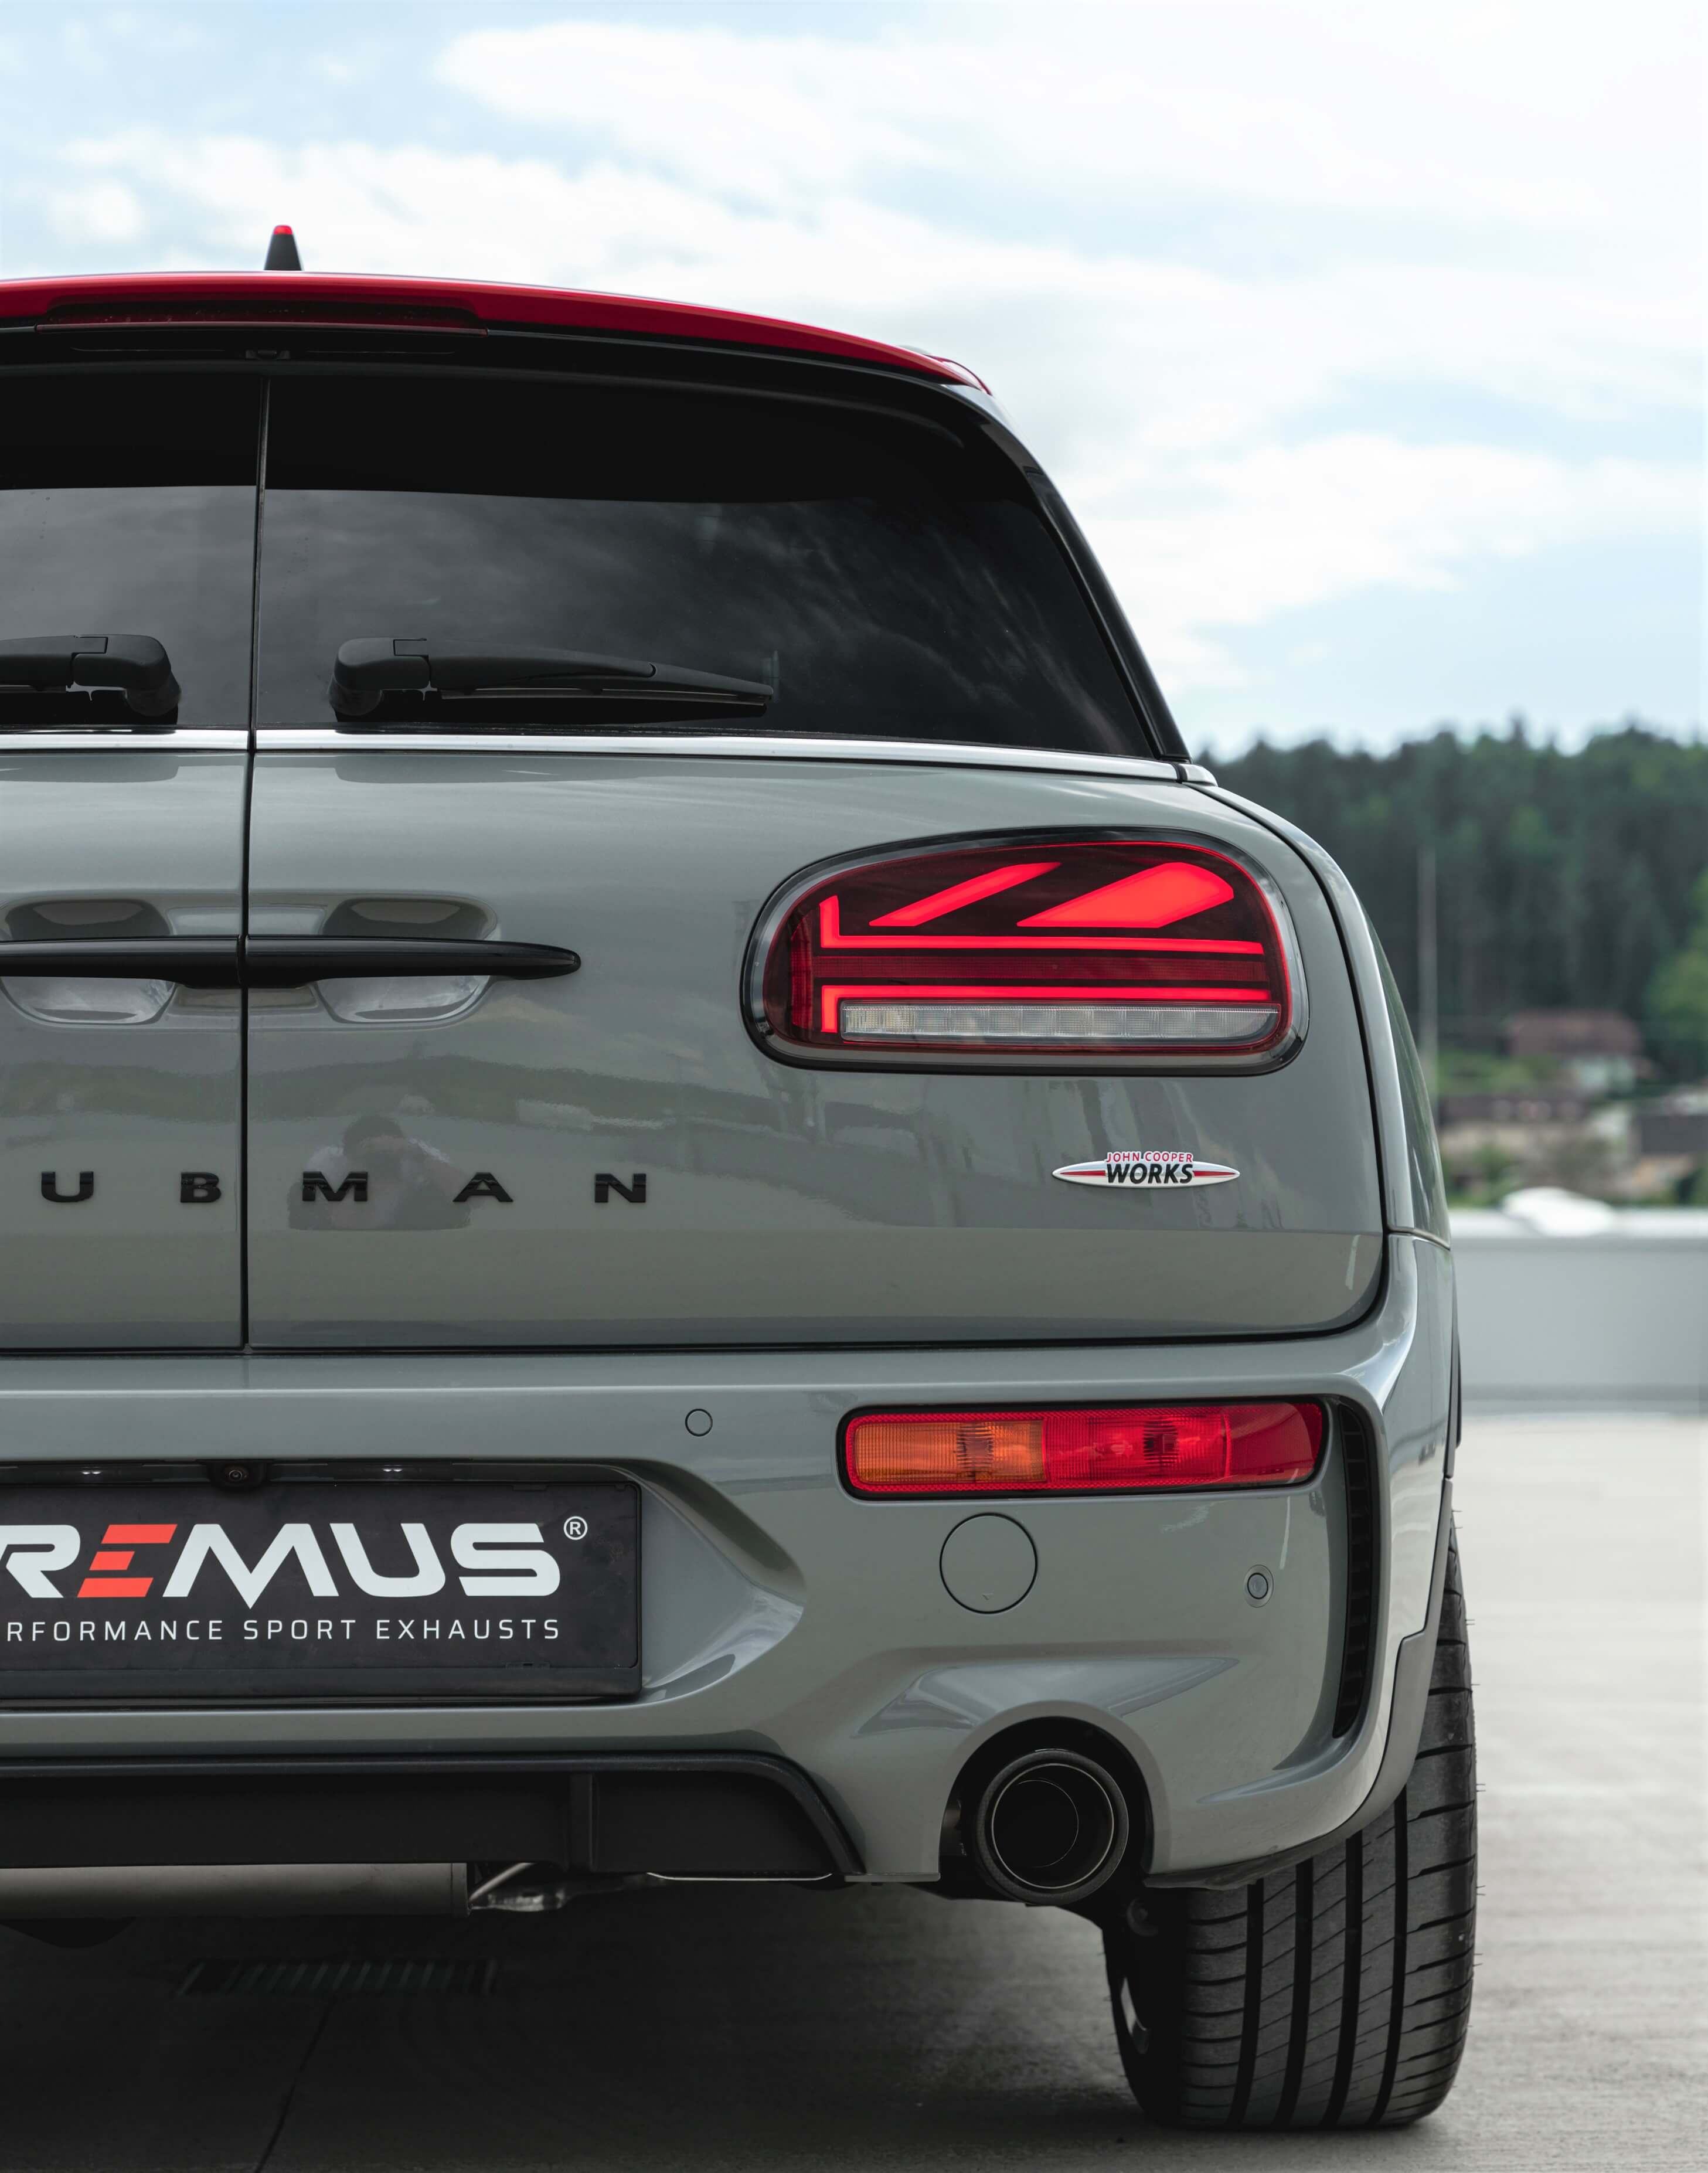 REMUS Sport Exhaust for your MINI F54 & F56